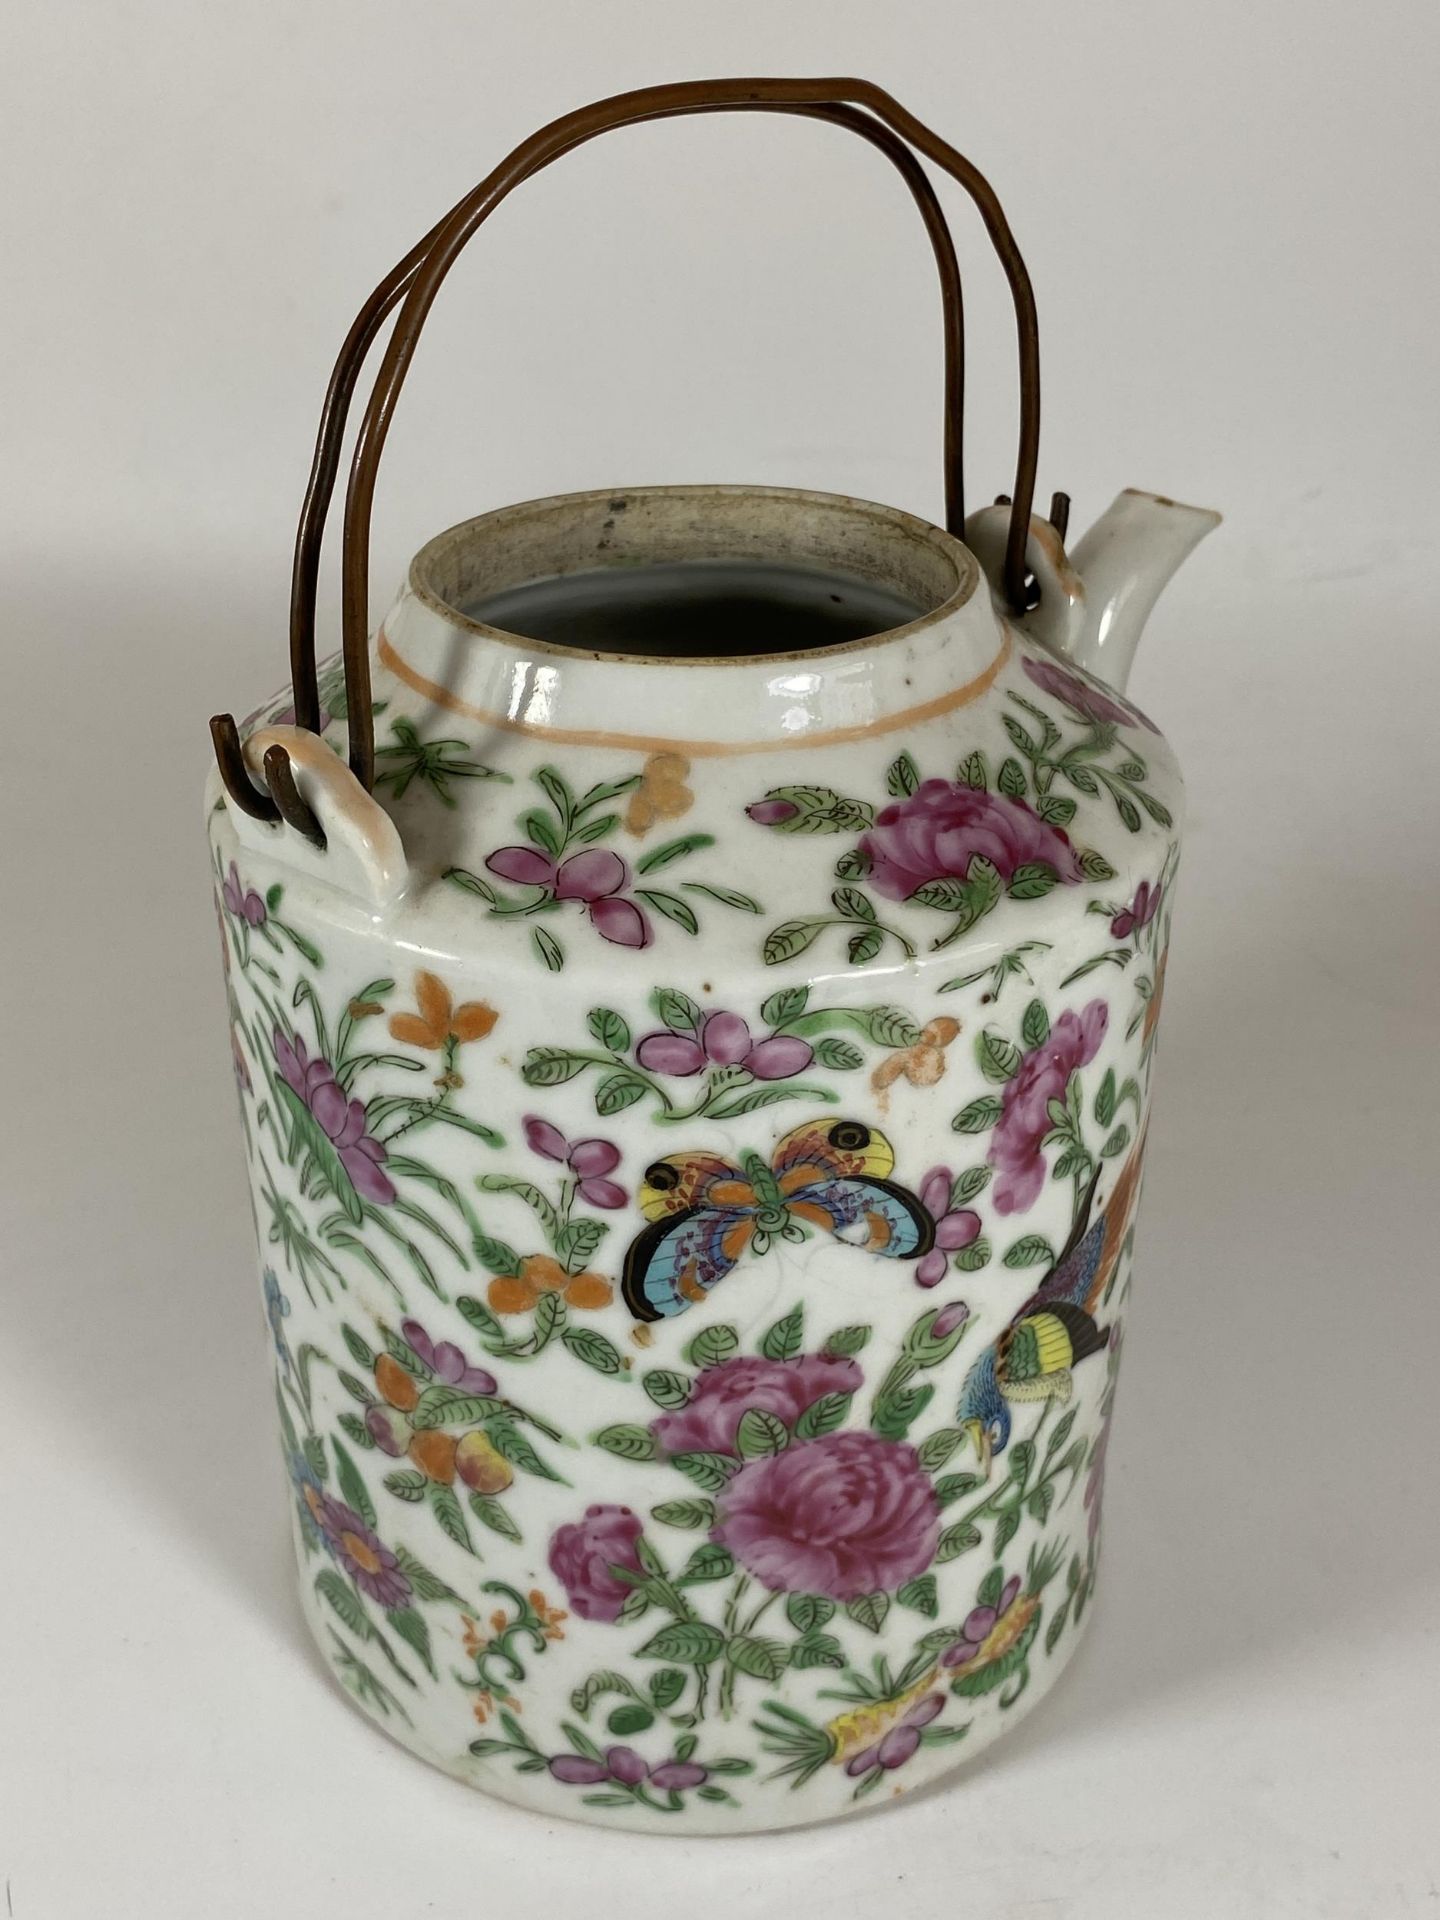 A 19TH CENTURY CHINESE QING CANTON FAMILLE ROSE PORCELAIN TEAPOT WITH BUTTERFLY AND FLORAL DESIGN, - Image 2 of 3